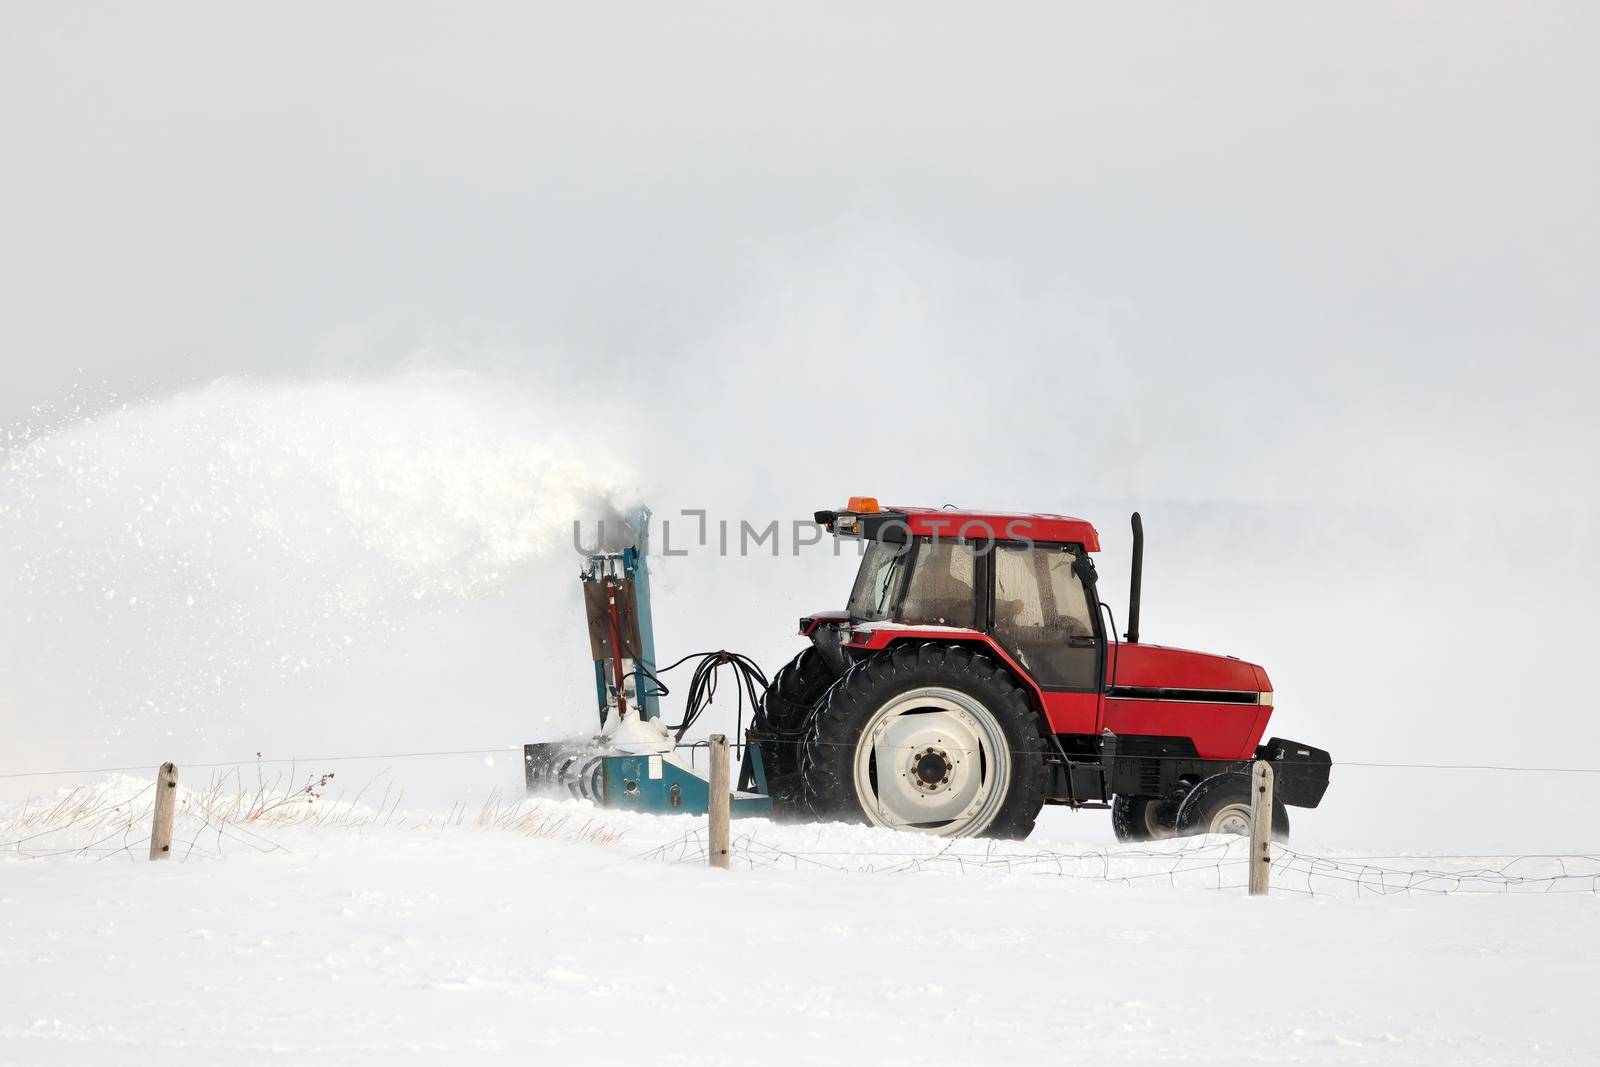 Red Tractor with snowblower attachment Snow Blowing a Driveway in a Rural Setting. It's windy and the blown snow creates a large plume of snow. High quality photo